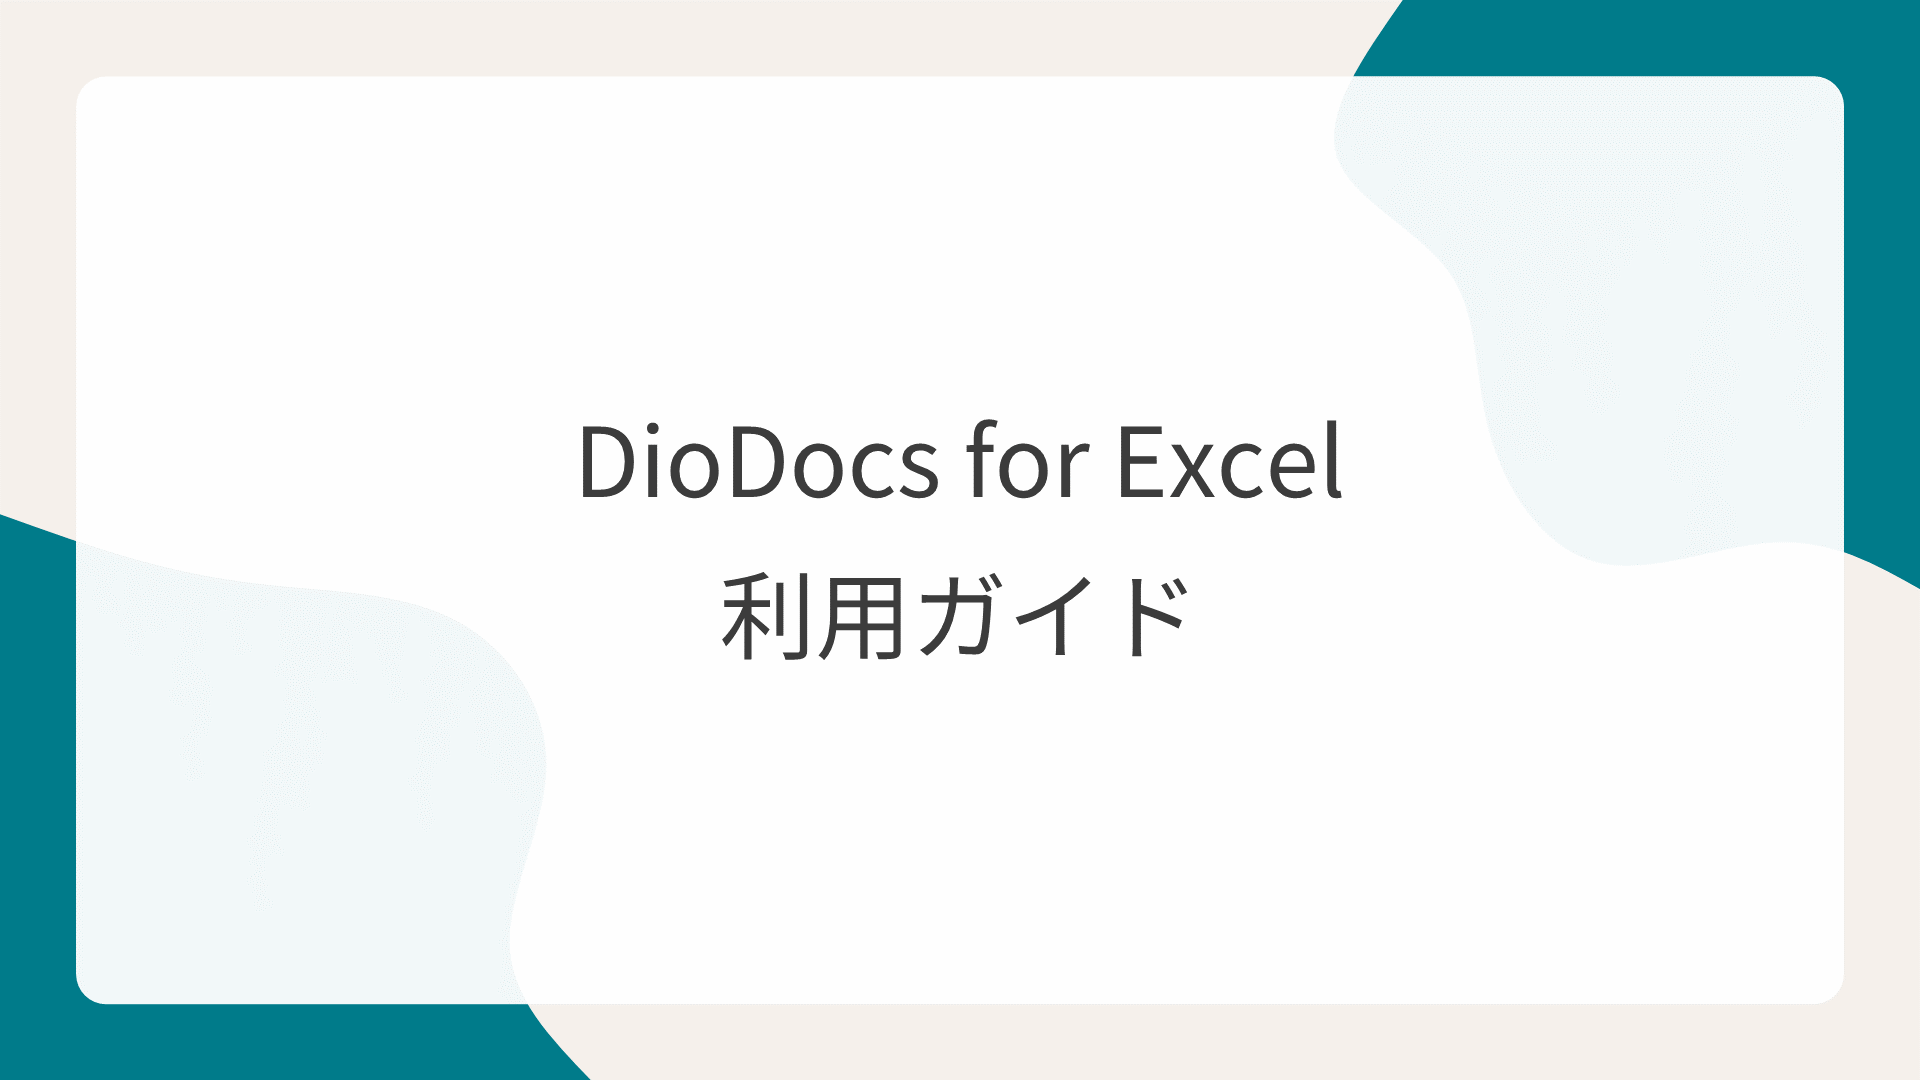 DioDocs for Excel利用ガイド